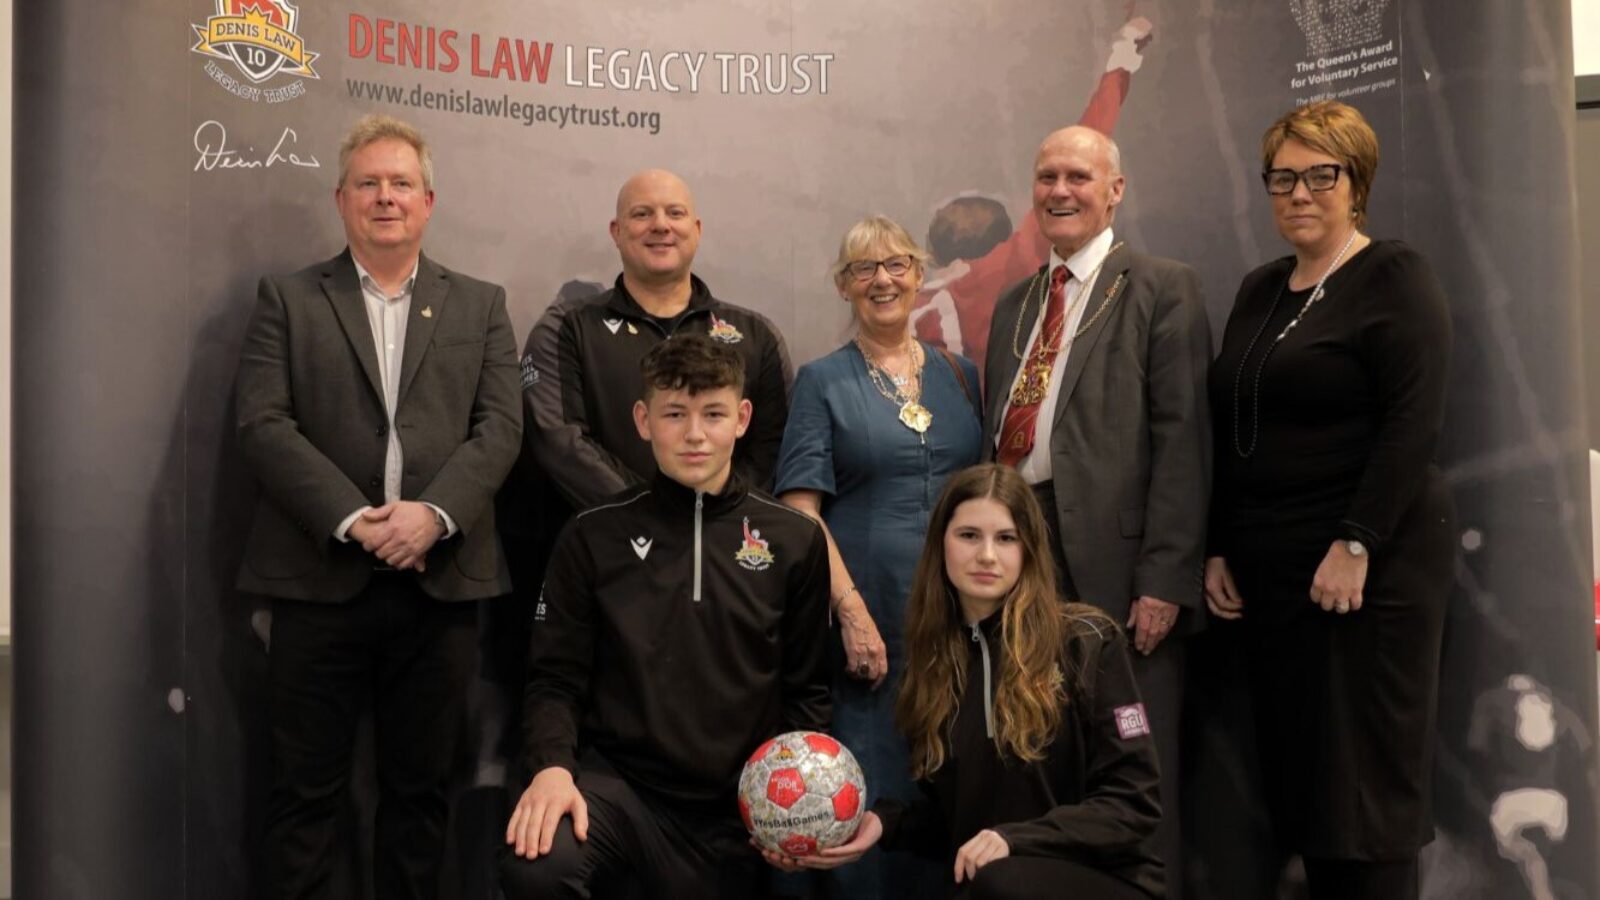 Denis Law RGUplus Award launched to recognise and celebrate community volunteering